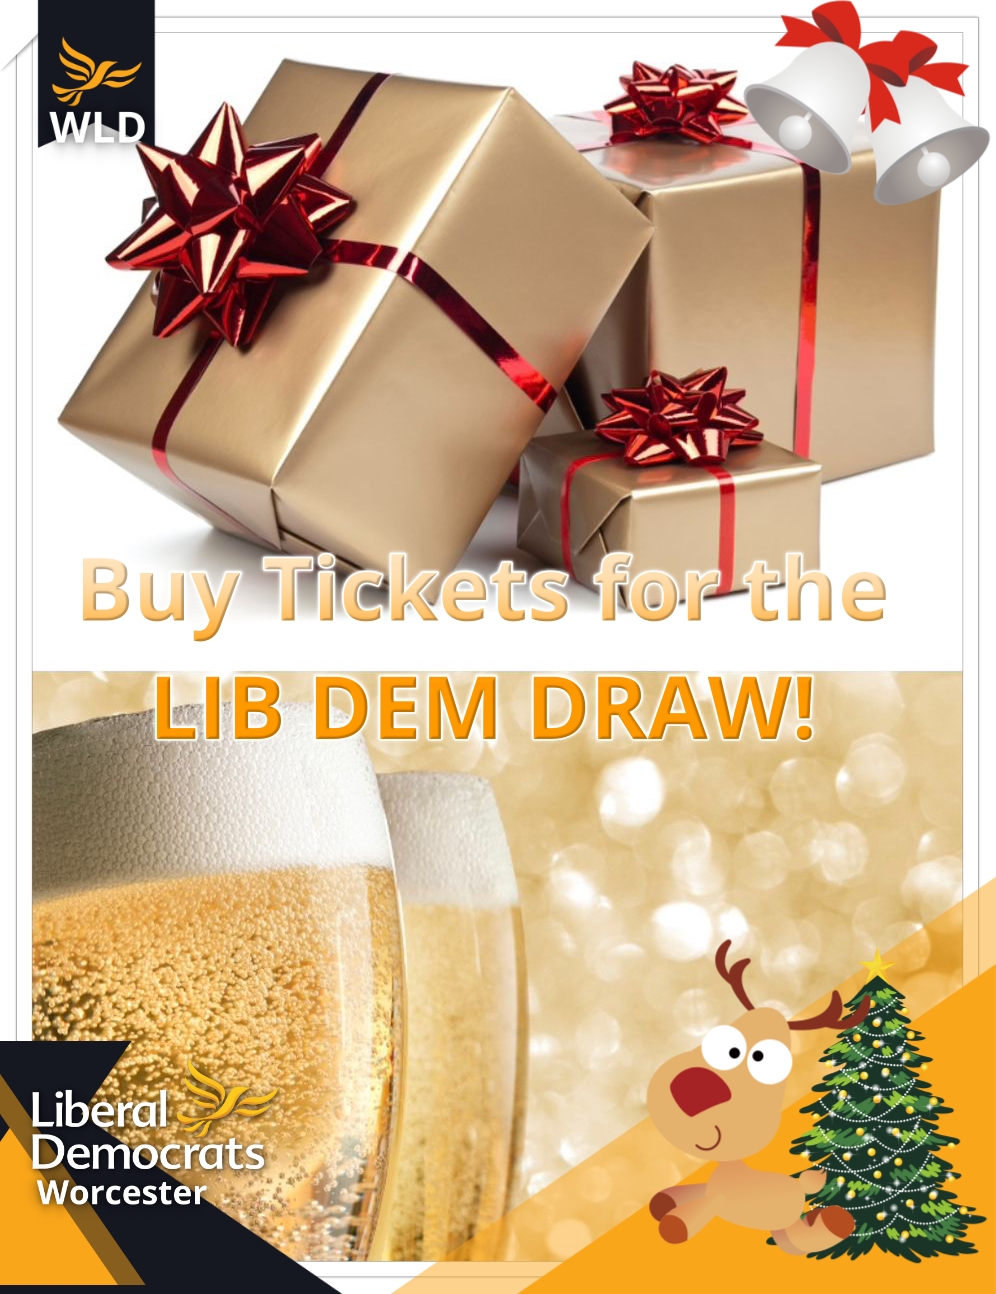 Buy Tickets for the Lib Dem Draw!